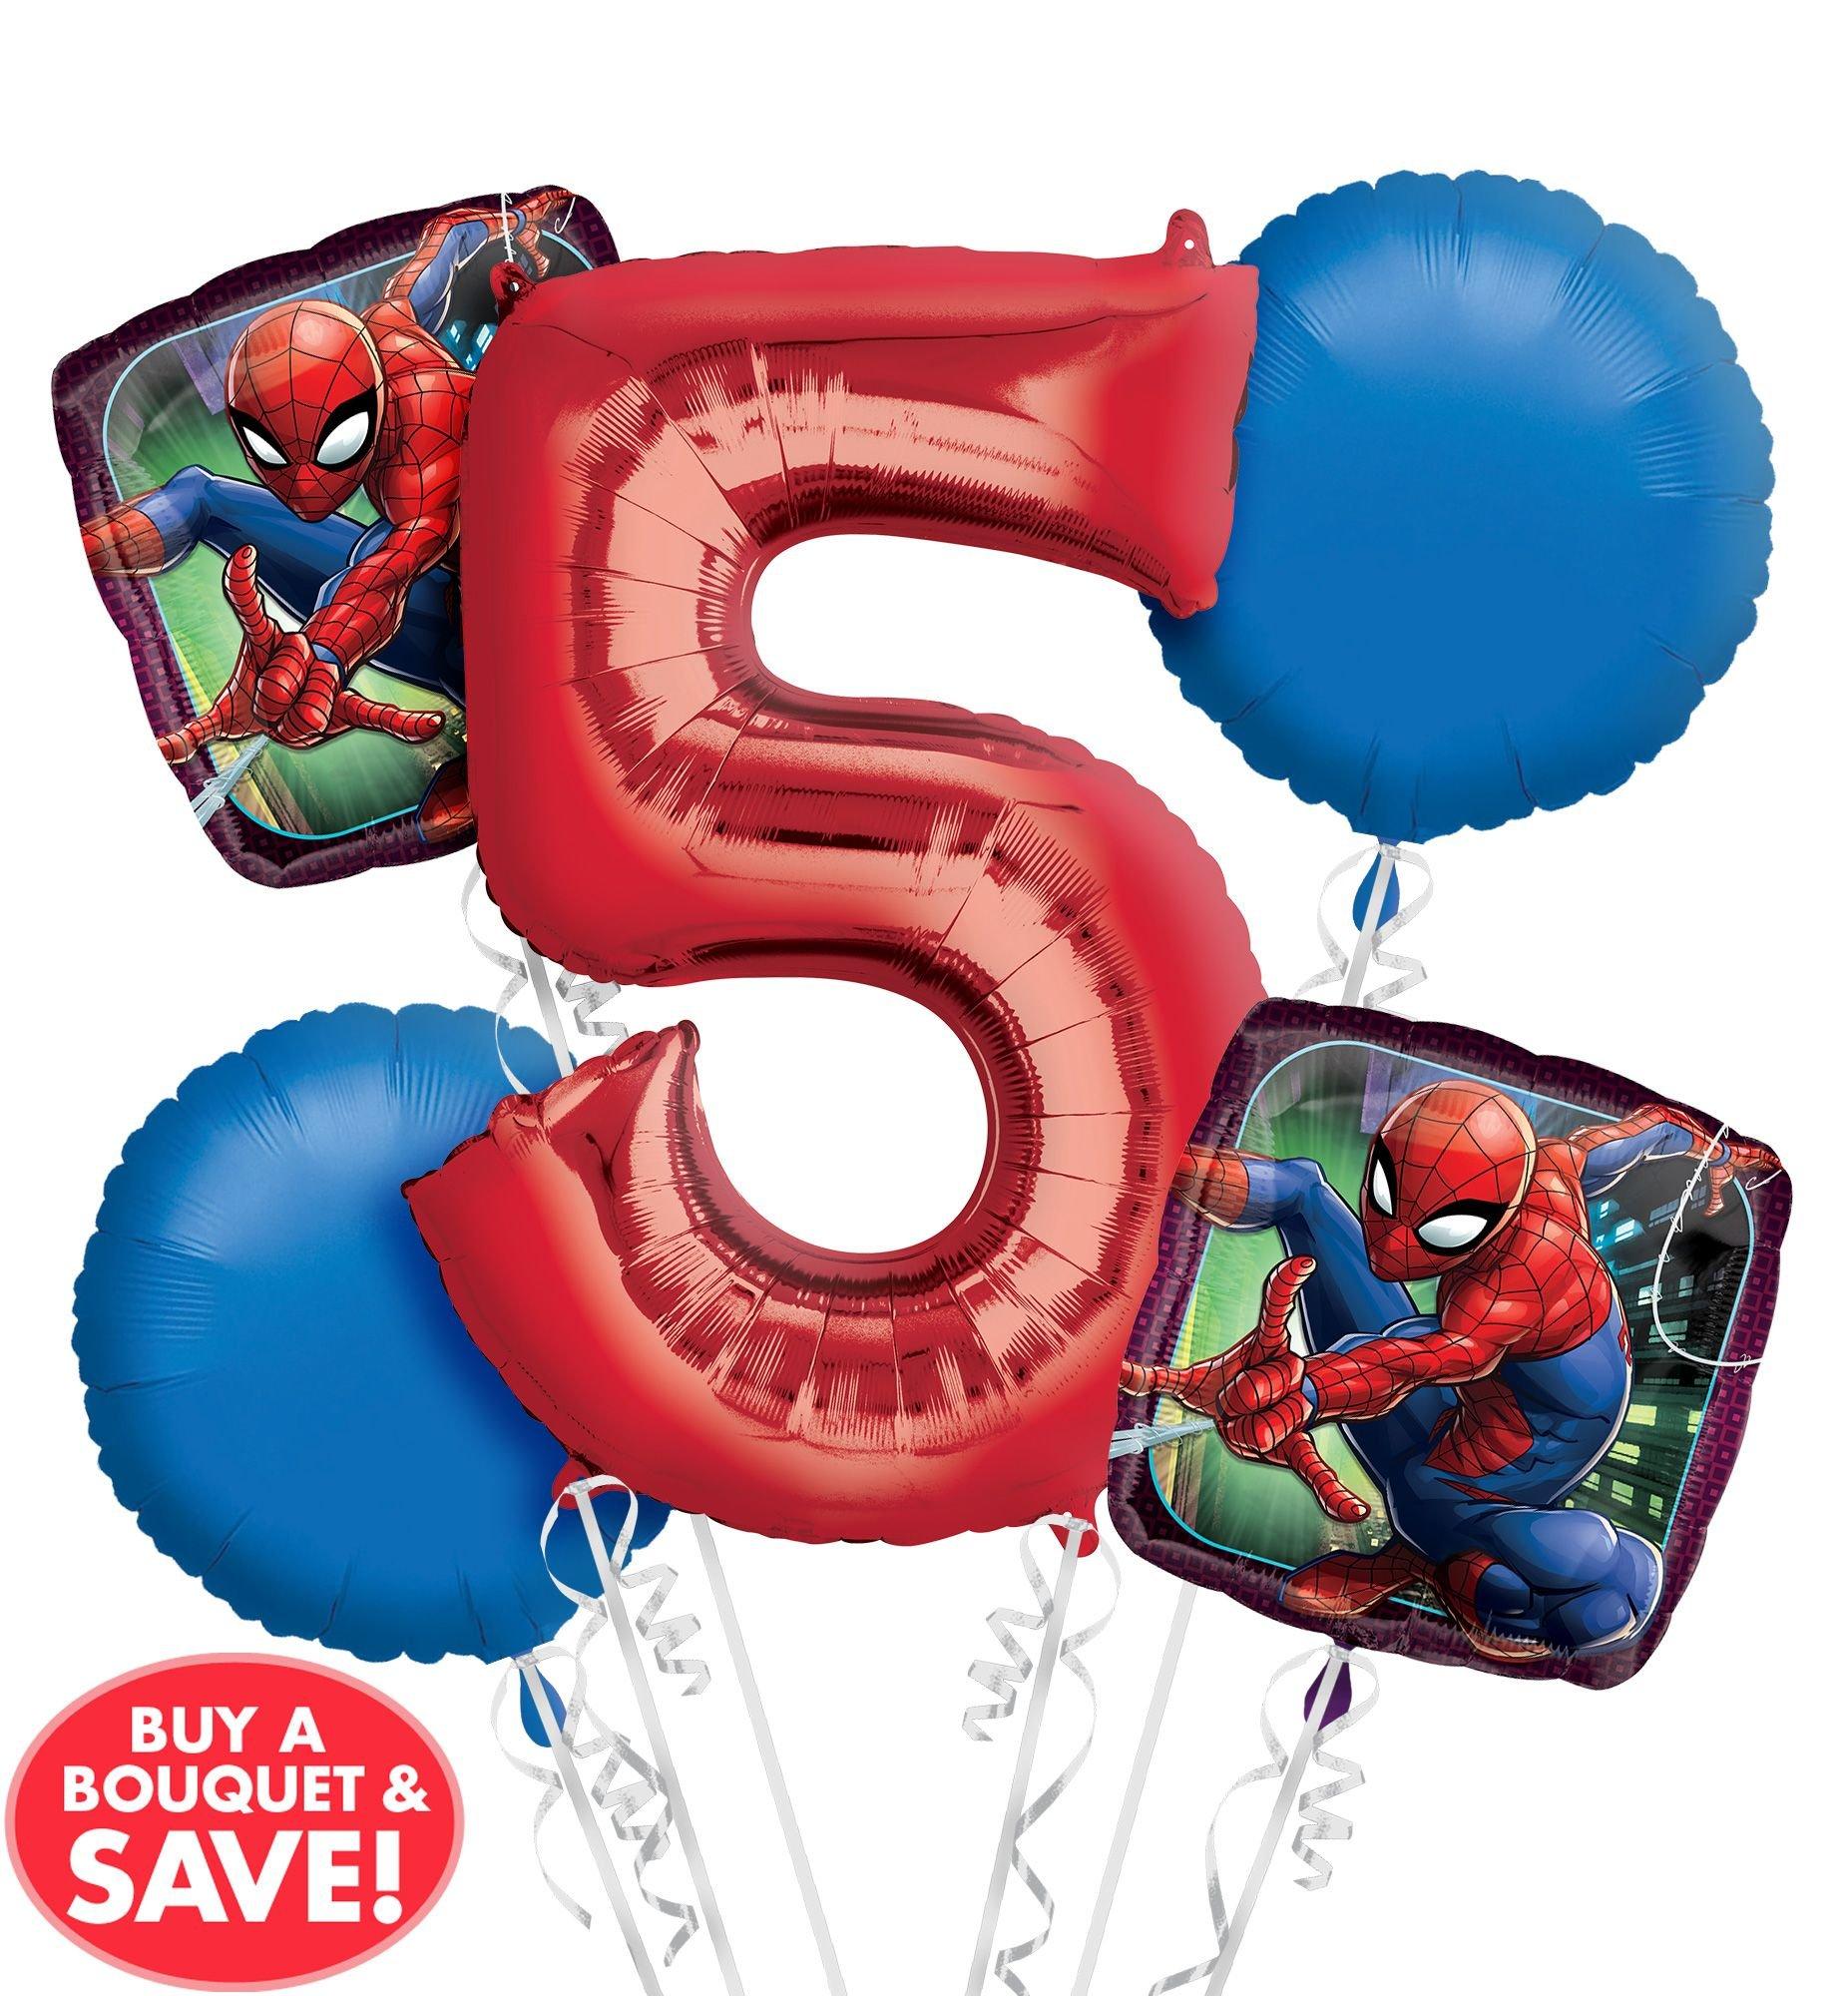 Spiderman 5th Birthday Balloon Bouquet 5pc | Party City